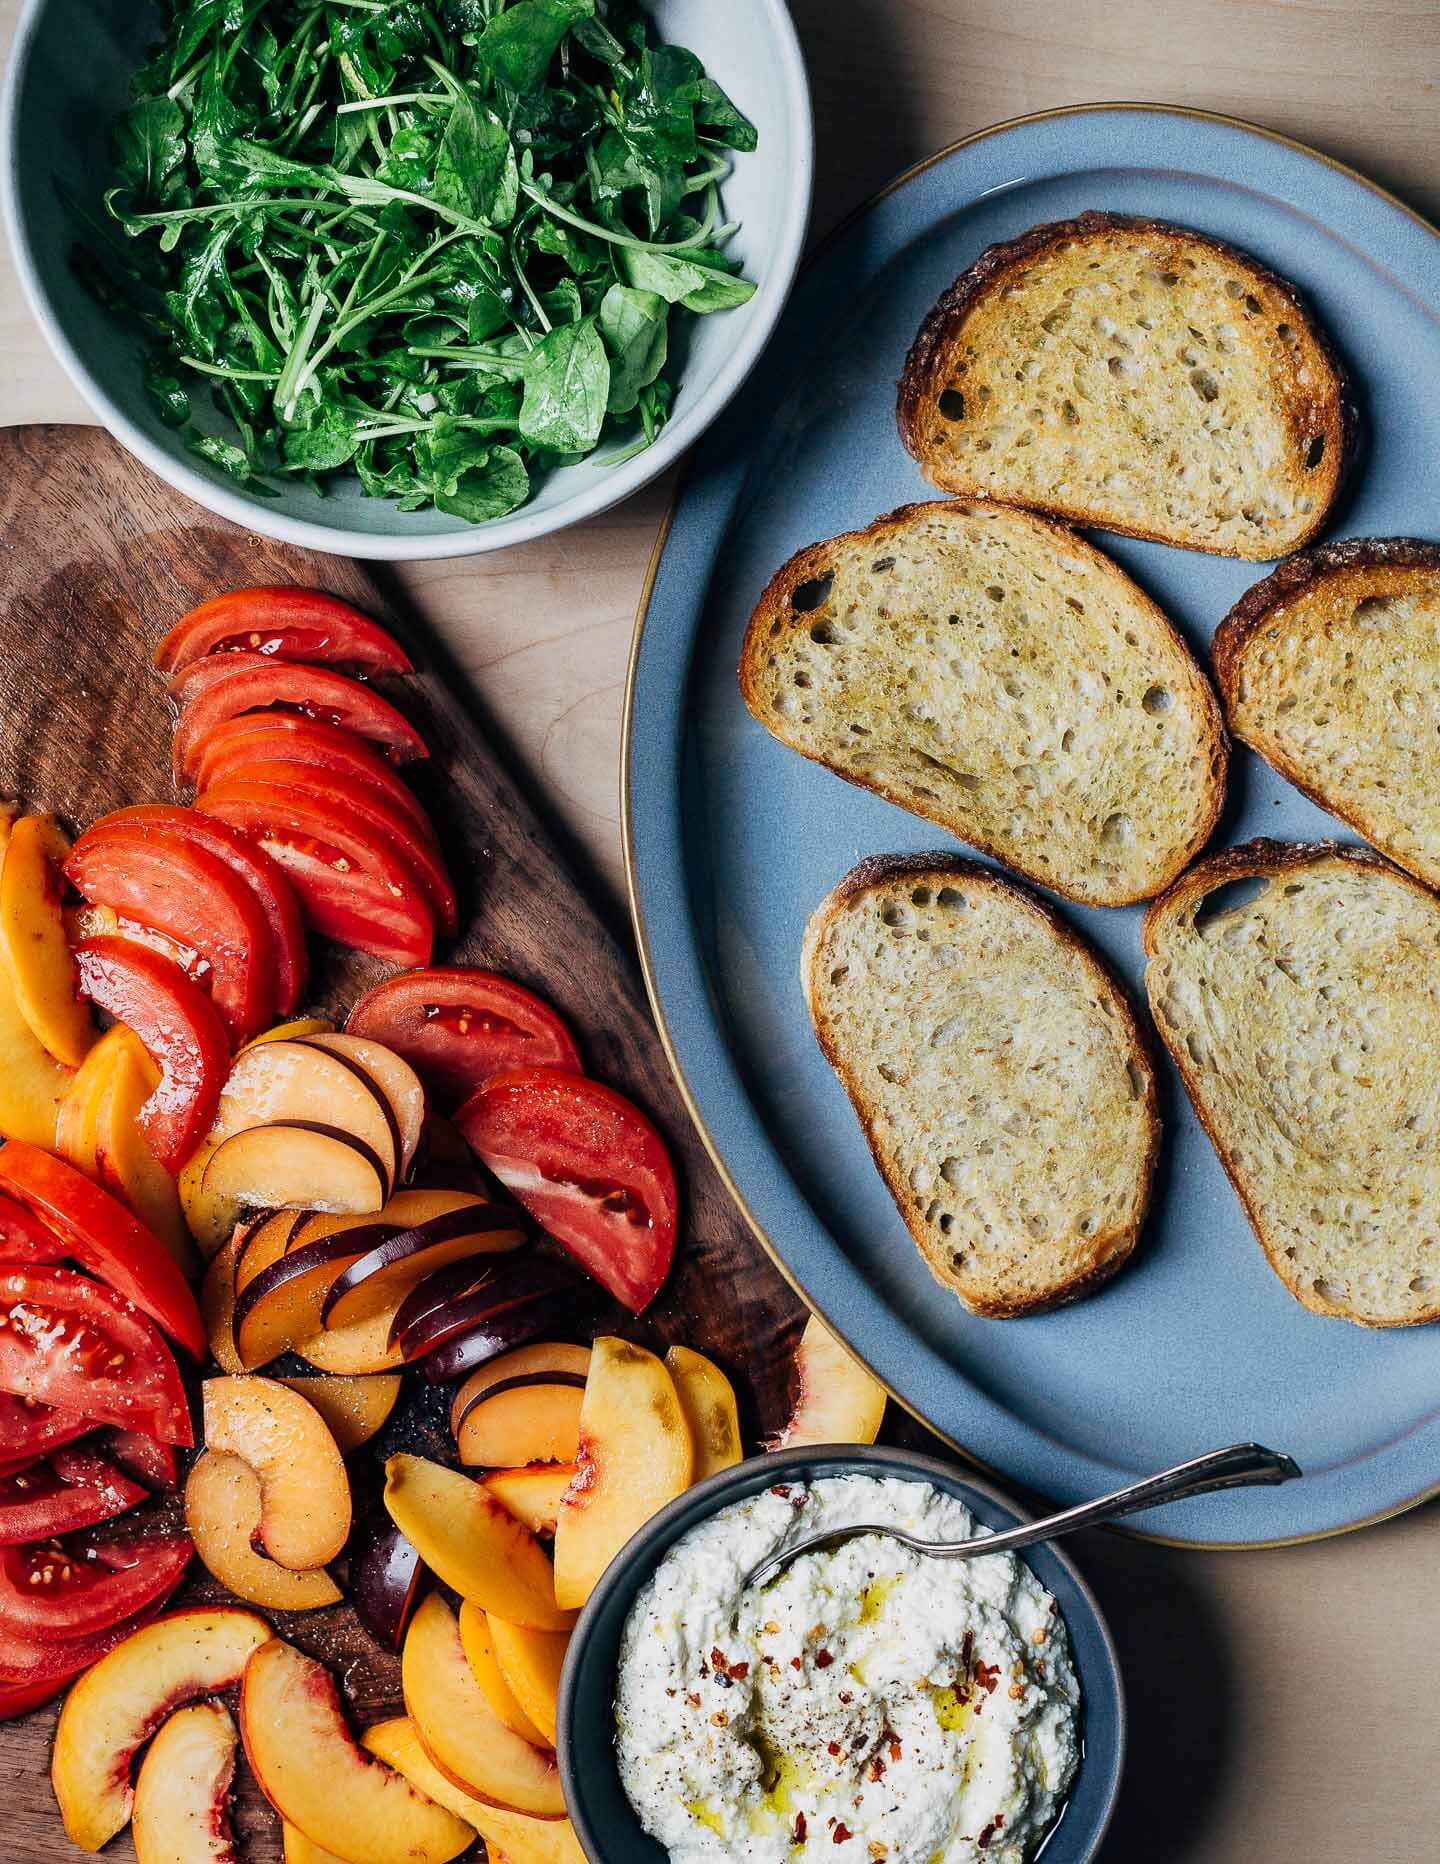 All the ingredients to assemble ricotta toasts, including crostini, arugula, sliced fruit, and ricotta. 